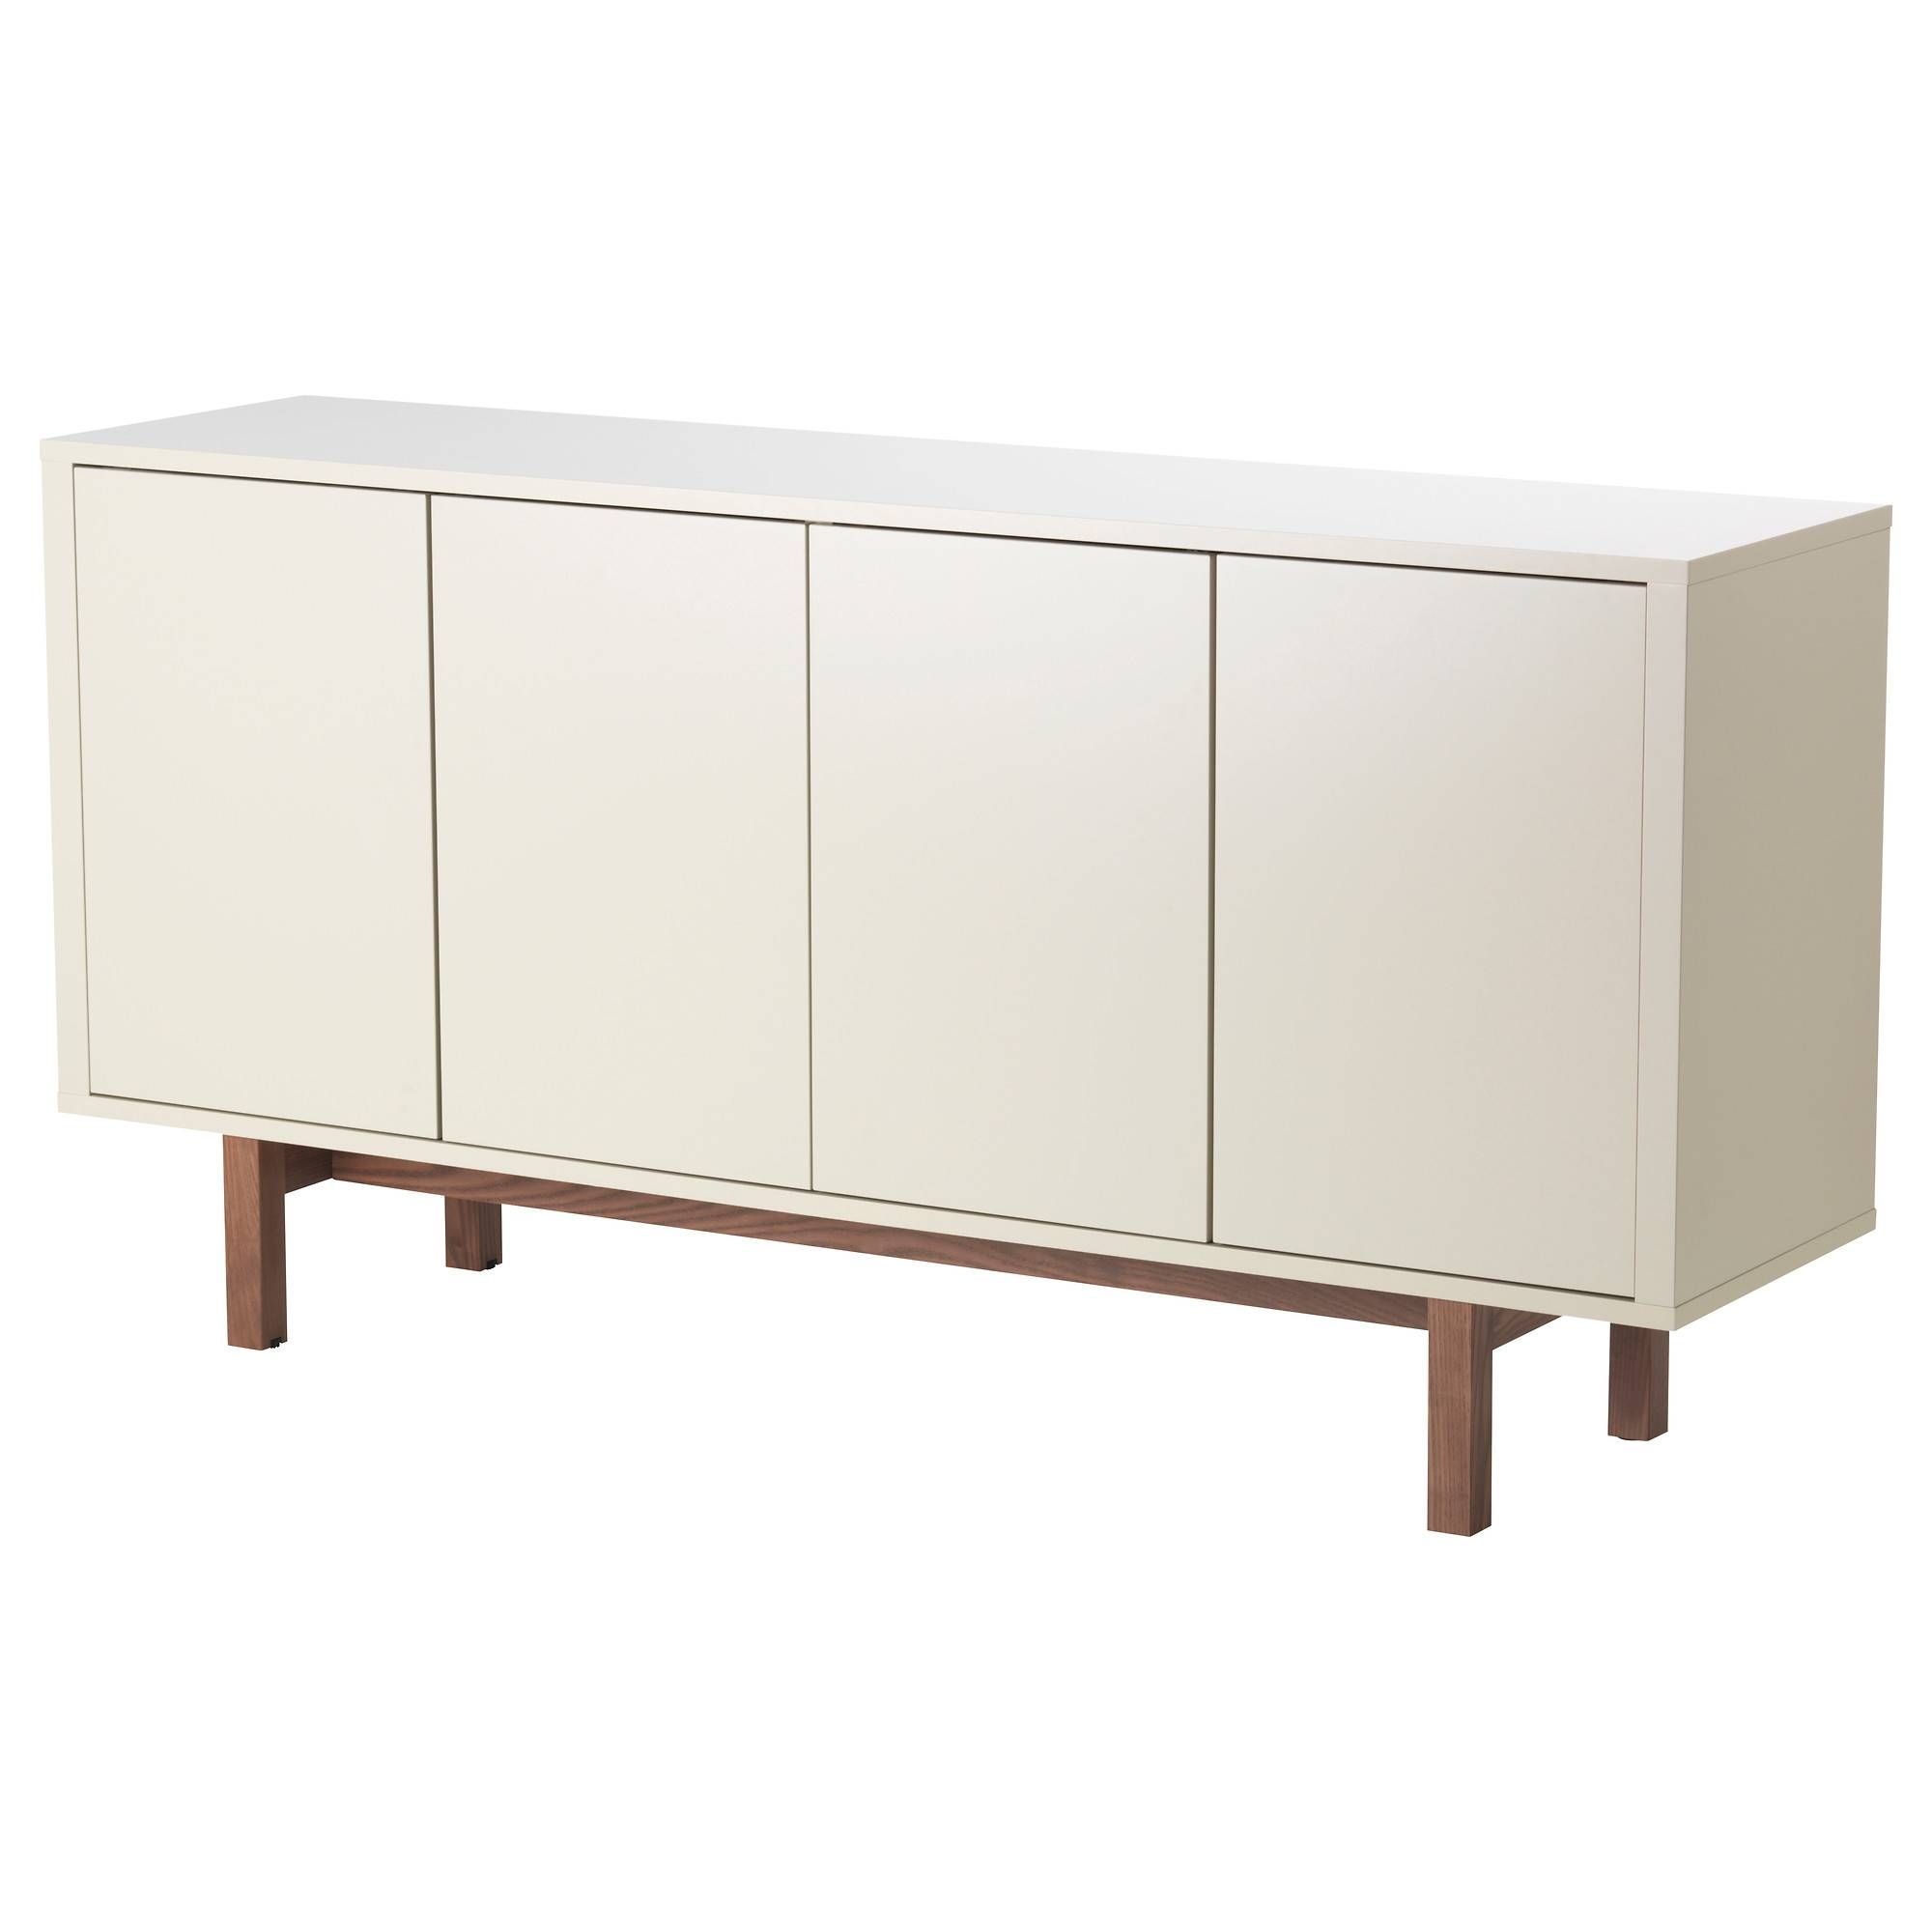 Awesome Ikea Stockholm Sideboard – Bjdgjy With Regard To Ikea Sideboards (View 7 of 15)